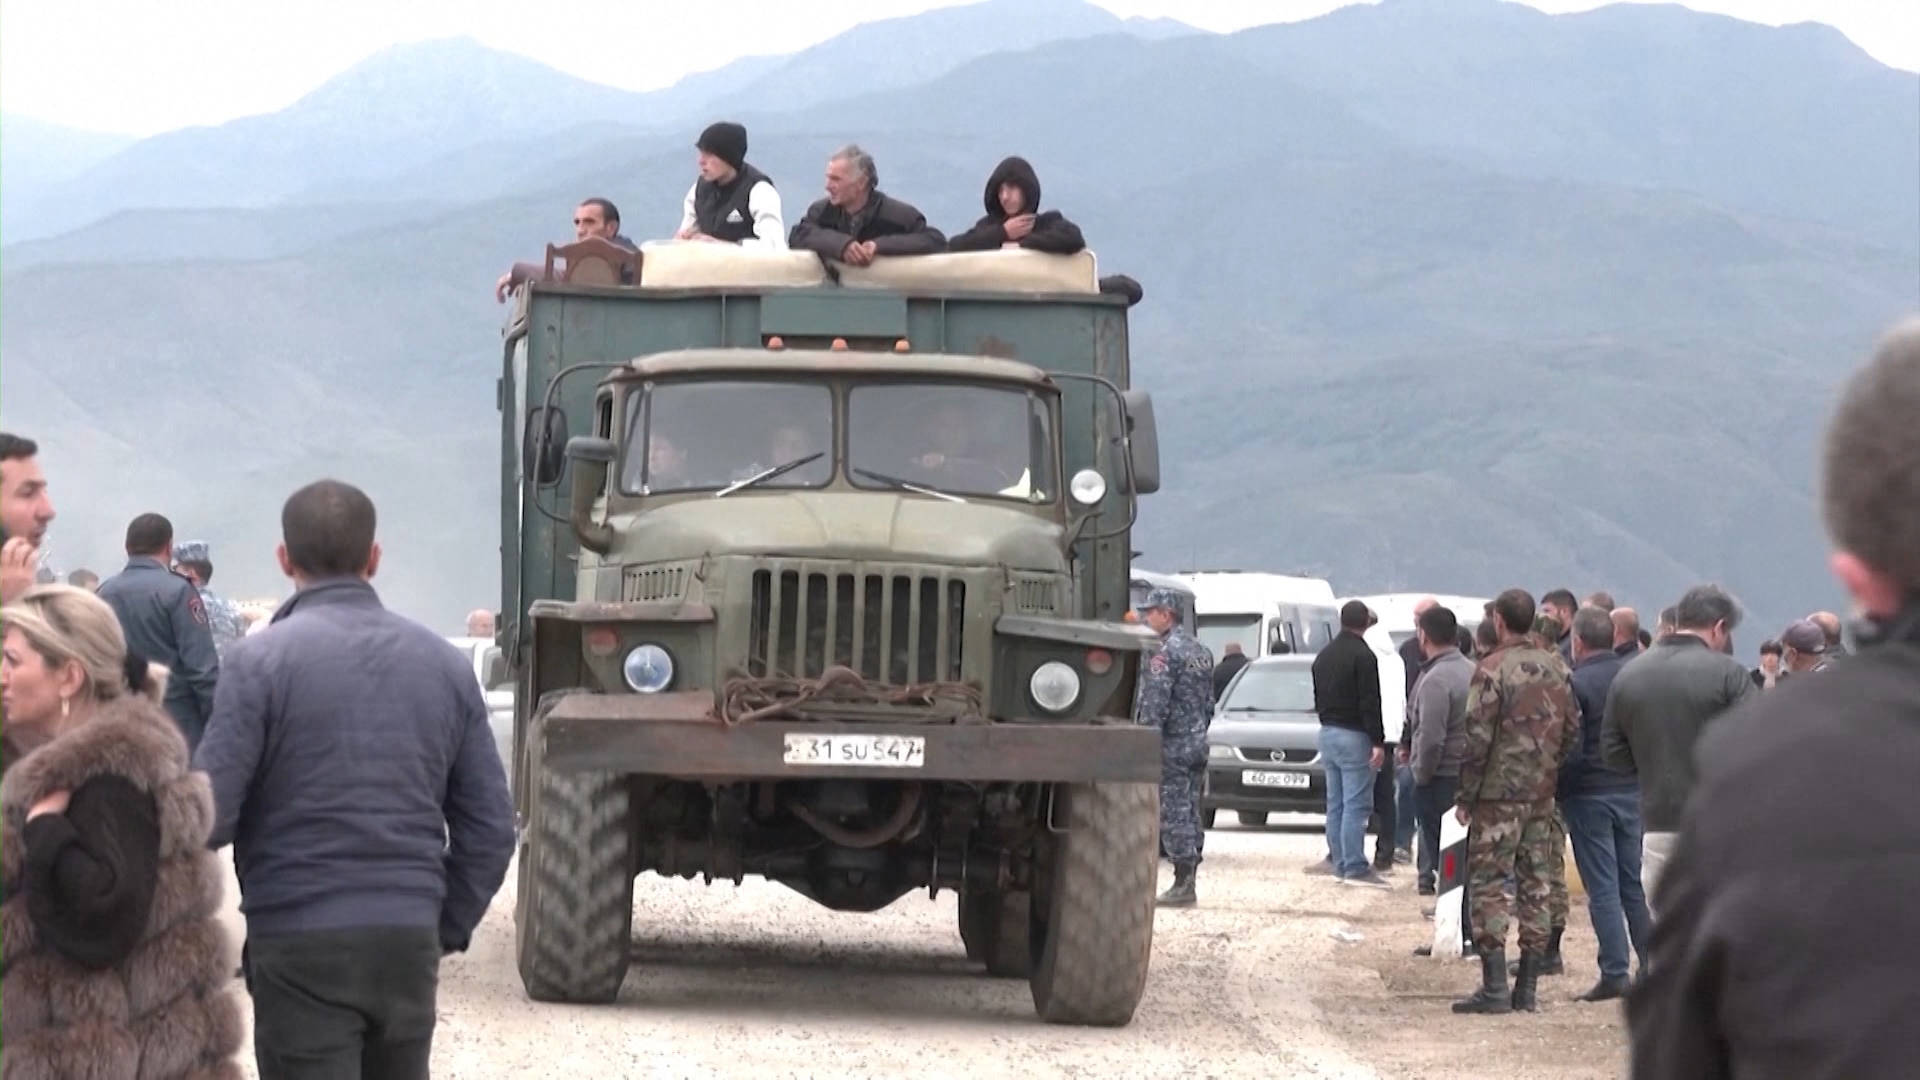 We could die at any moment:' Ethnic Armenians recall fleeing  Nagorno-Karabakh